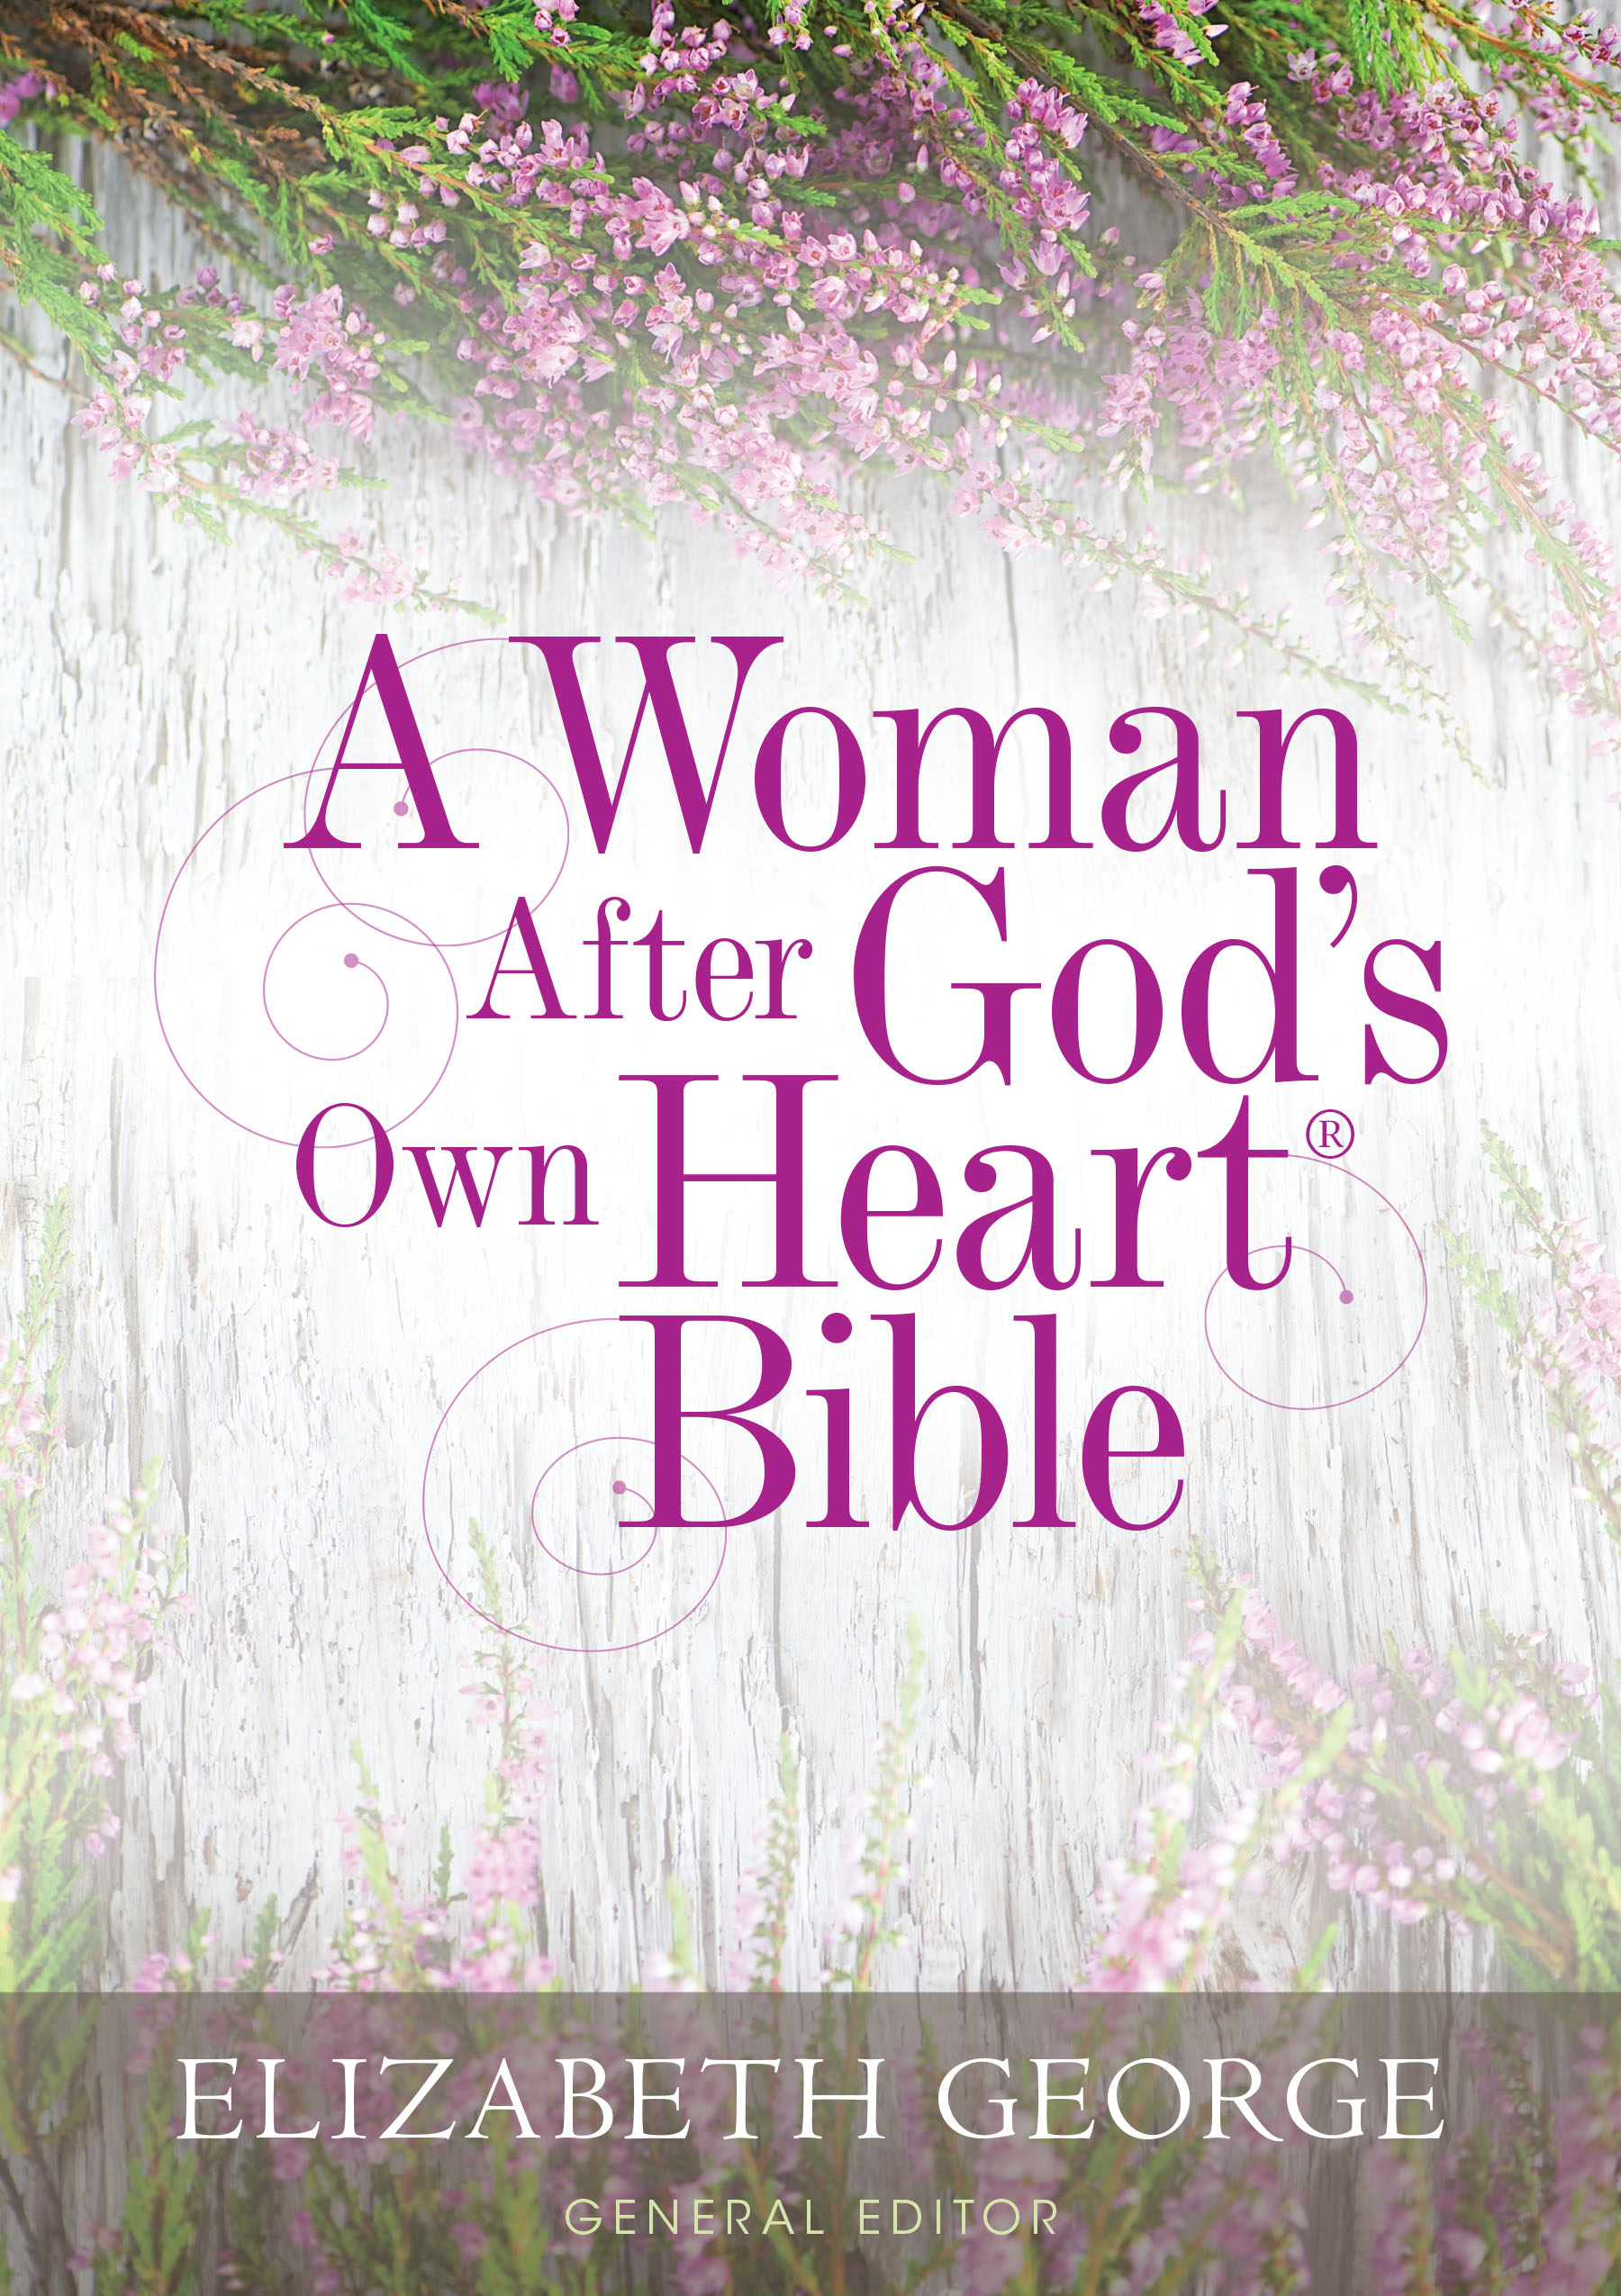 A Woman After God's Own Heart Bible